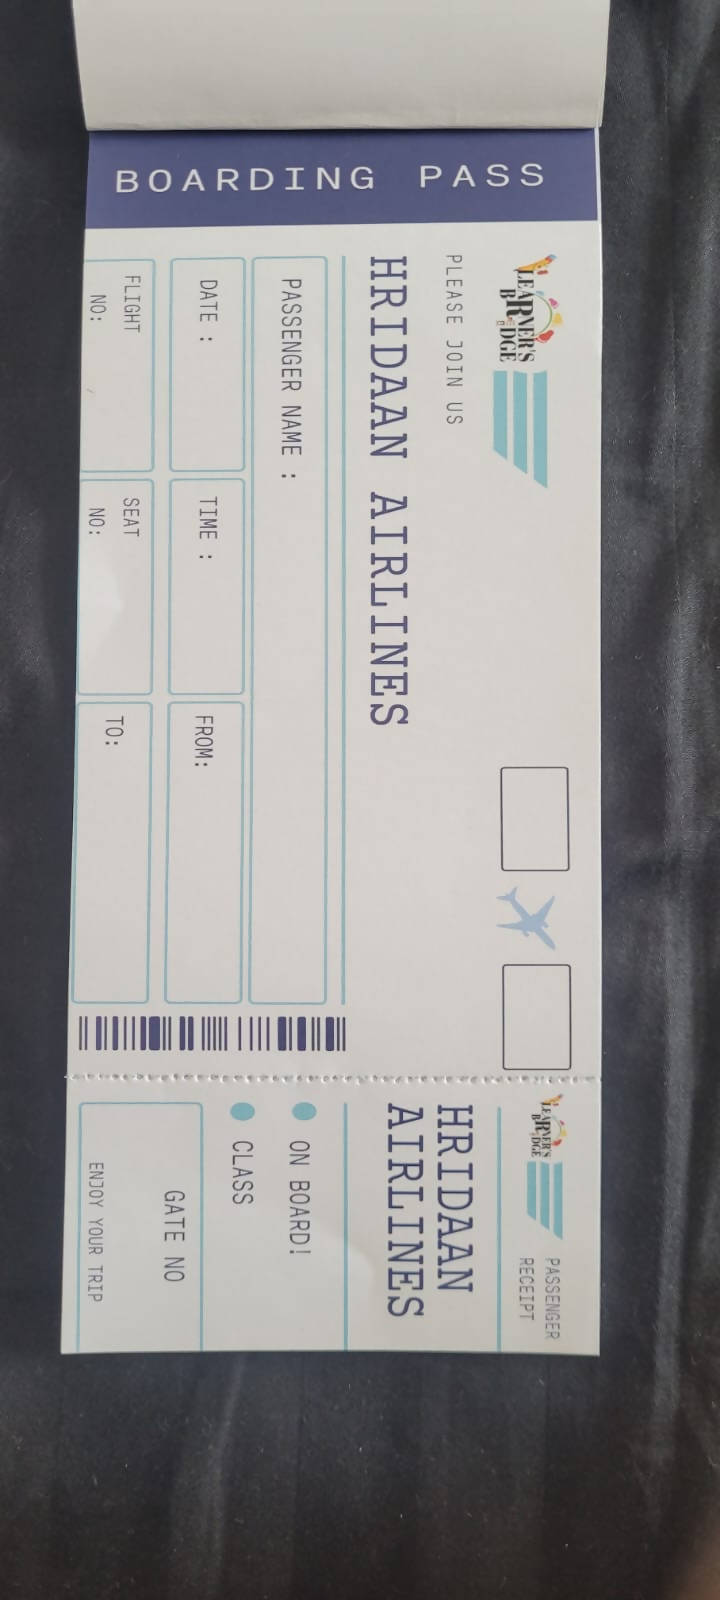 Personalized Boarding Pass